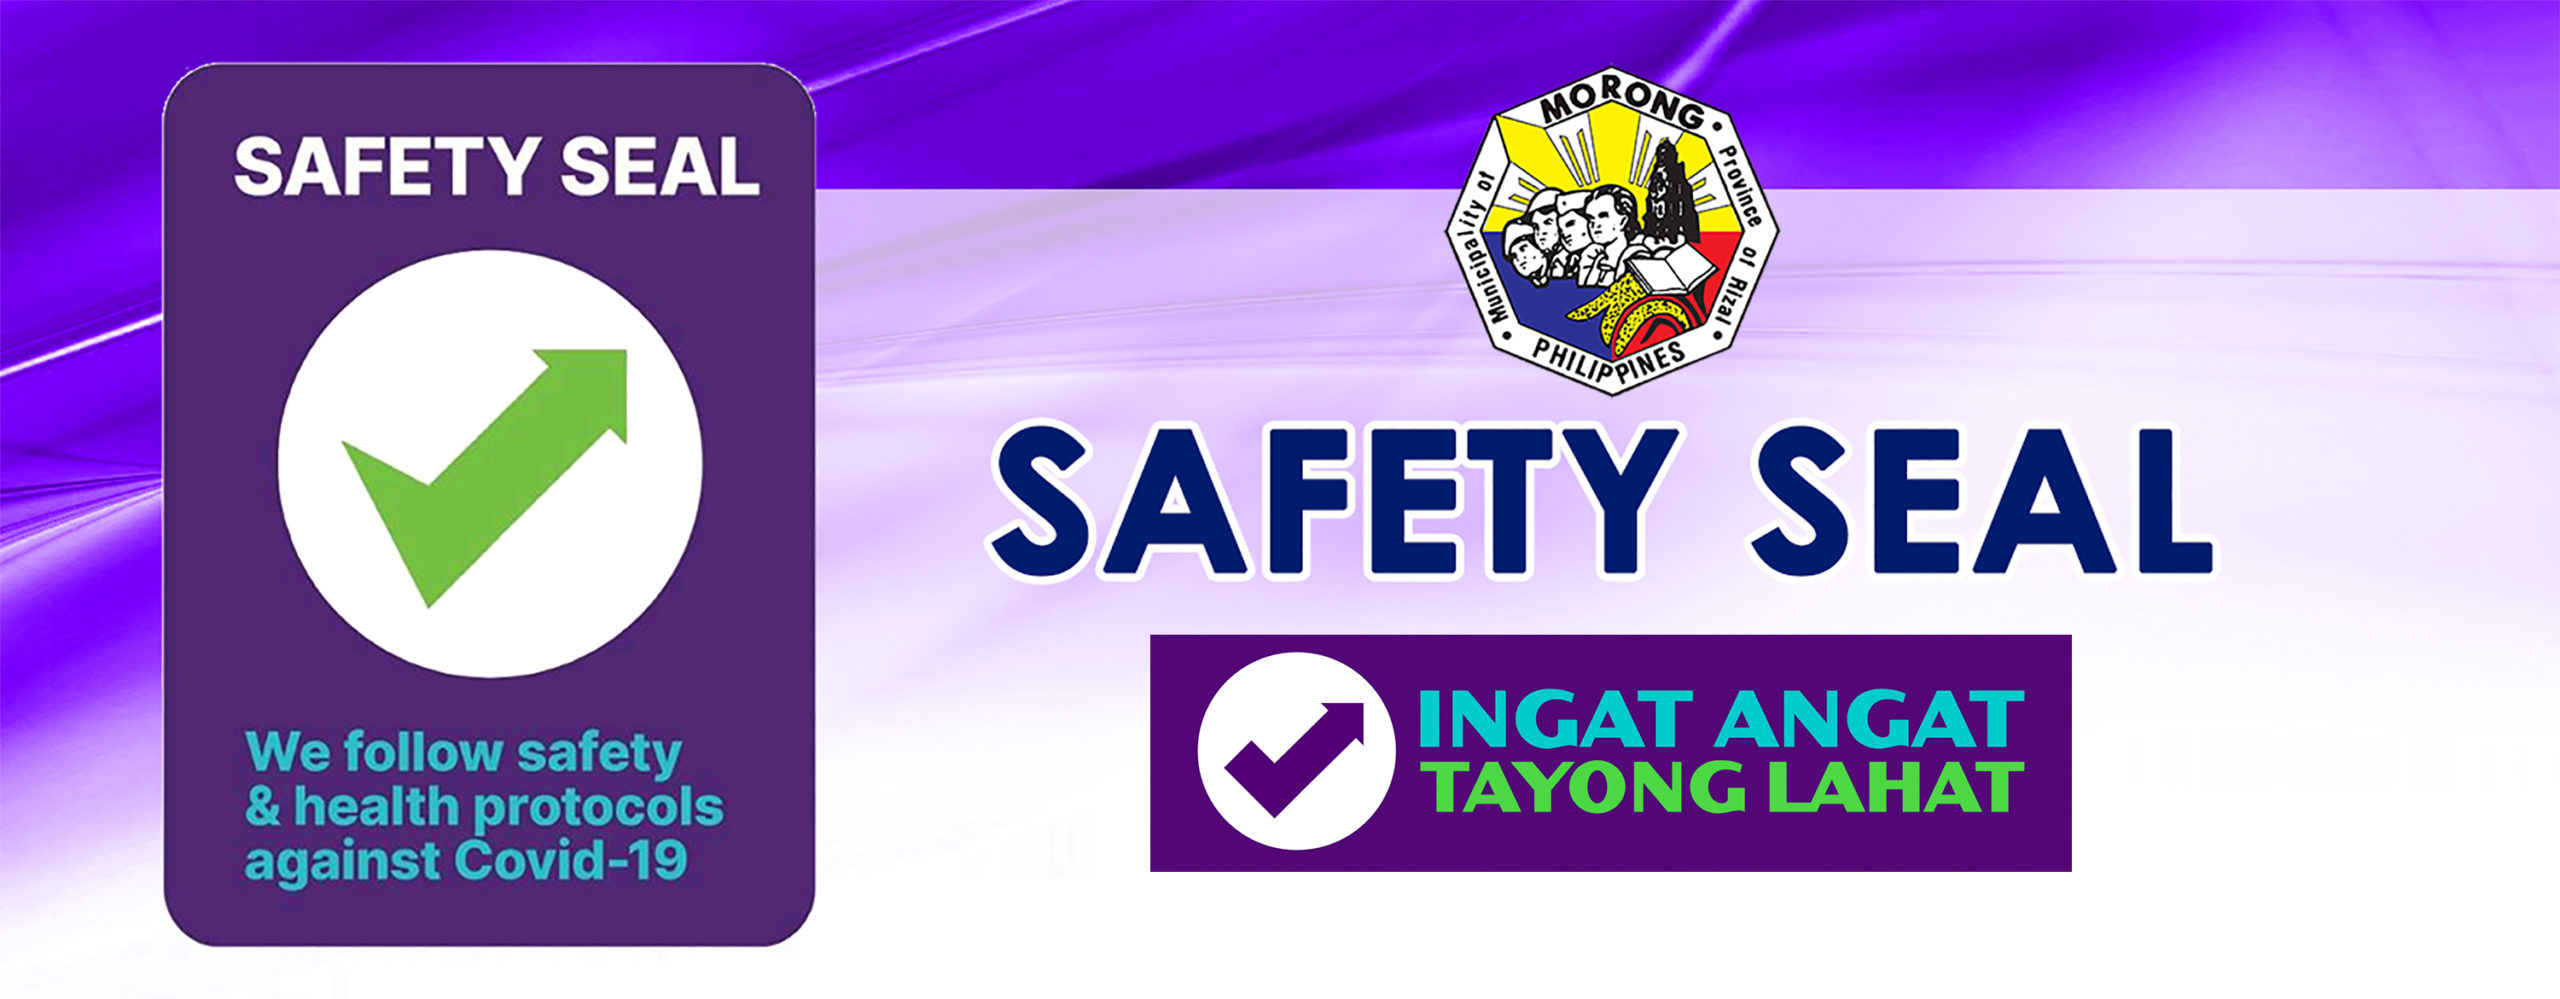 List of Business Establishments with Safety Seal